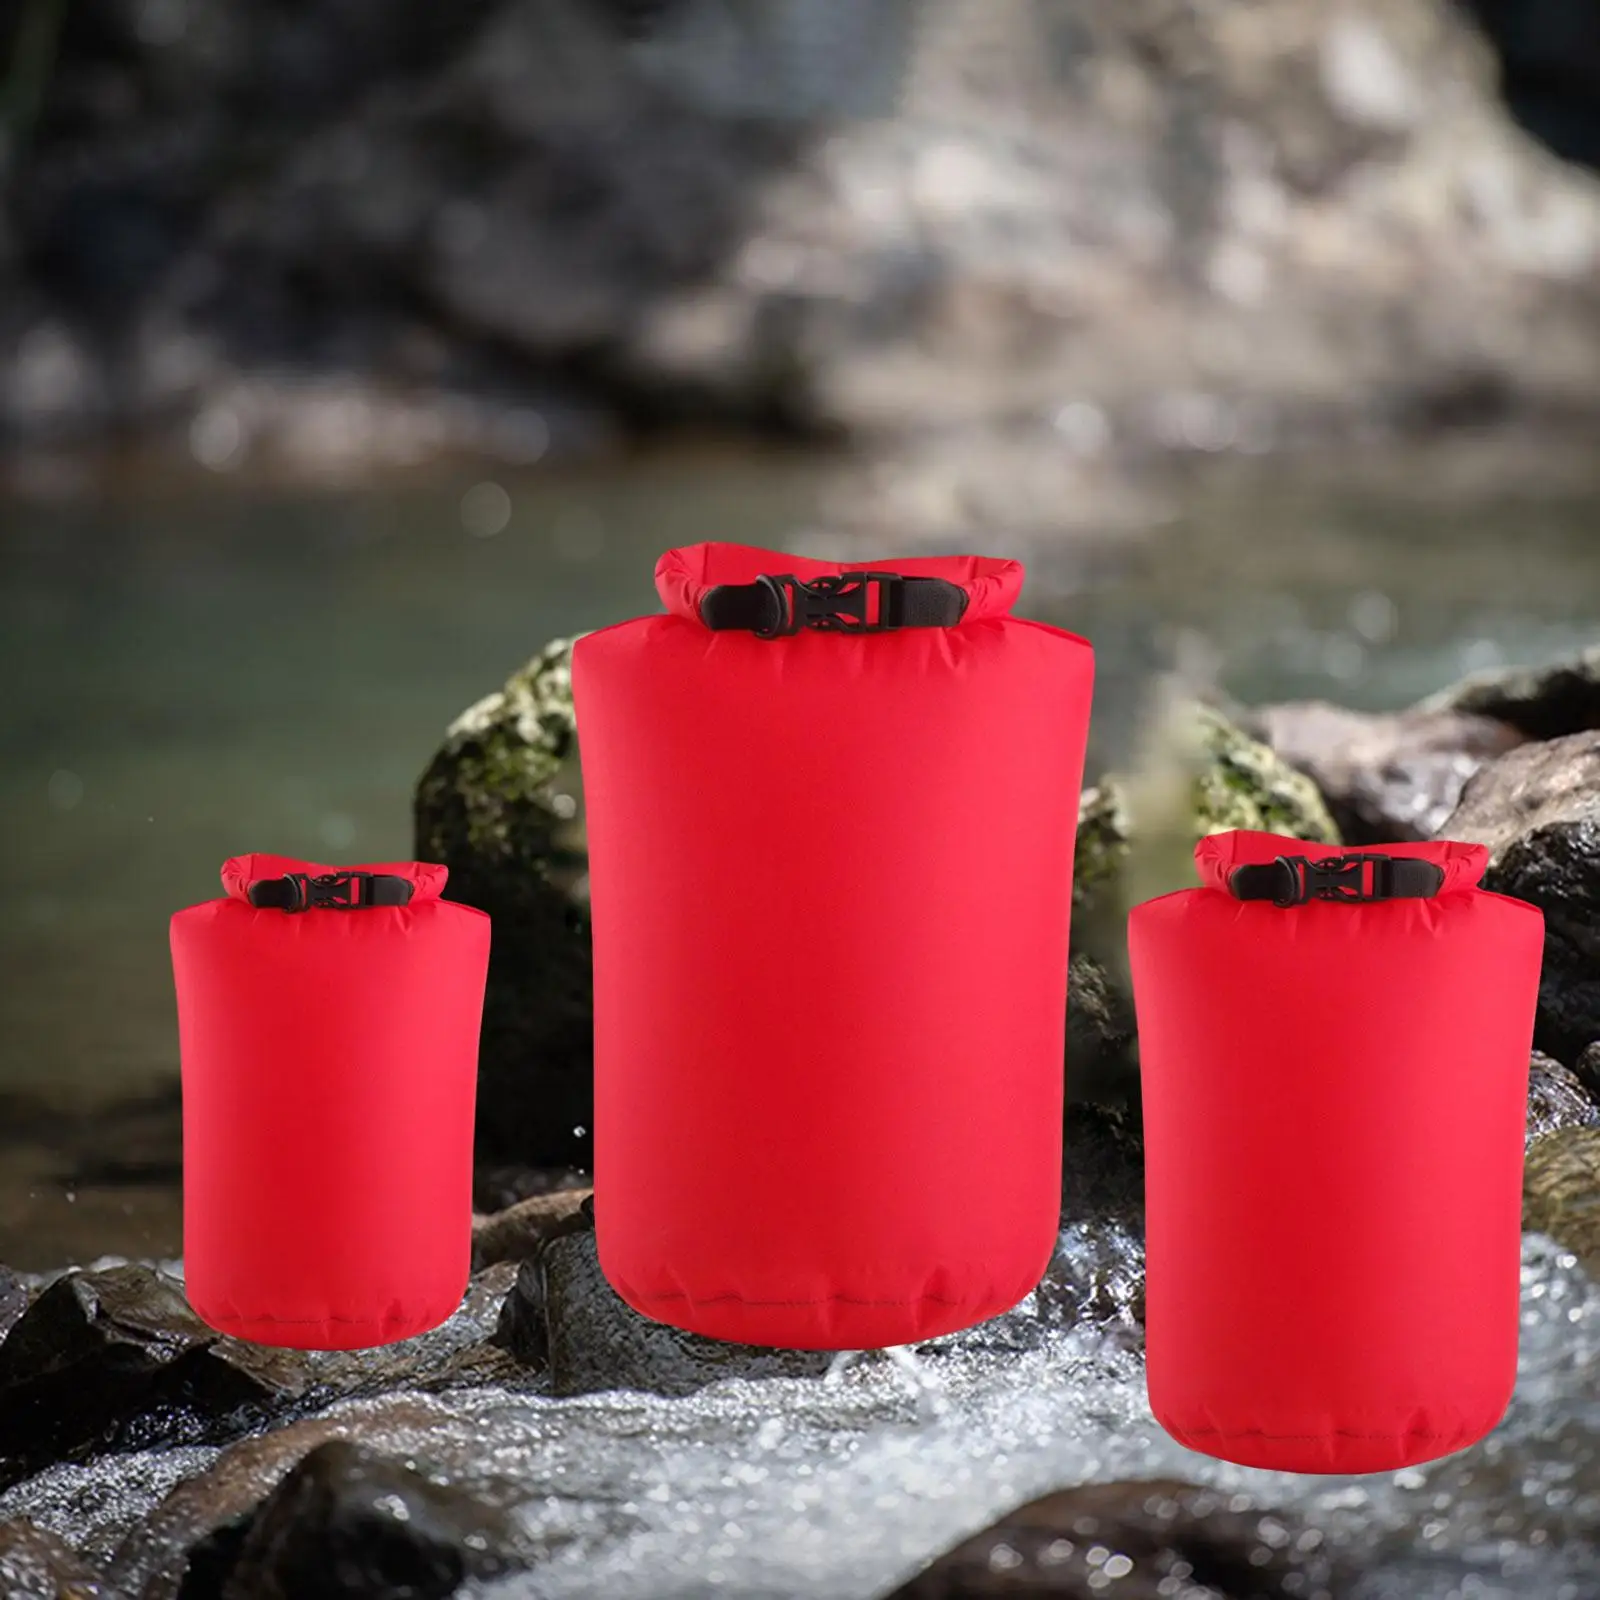 3Pcs Waterproof Dry Bags 8L 40L 70L Roll up Top Storage Dry Sack Bags Float Pouch for Drifting Swimming Hiking Fishing Canoeing